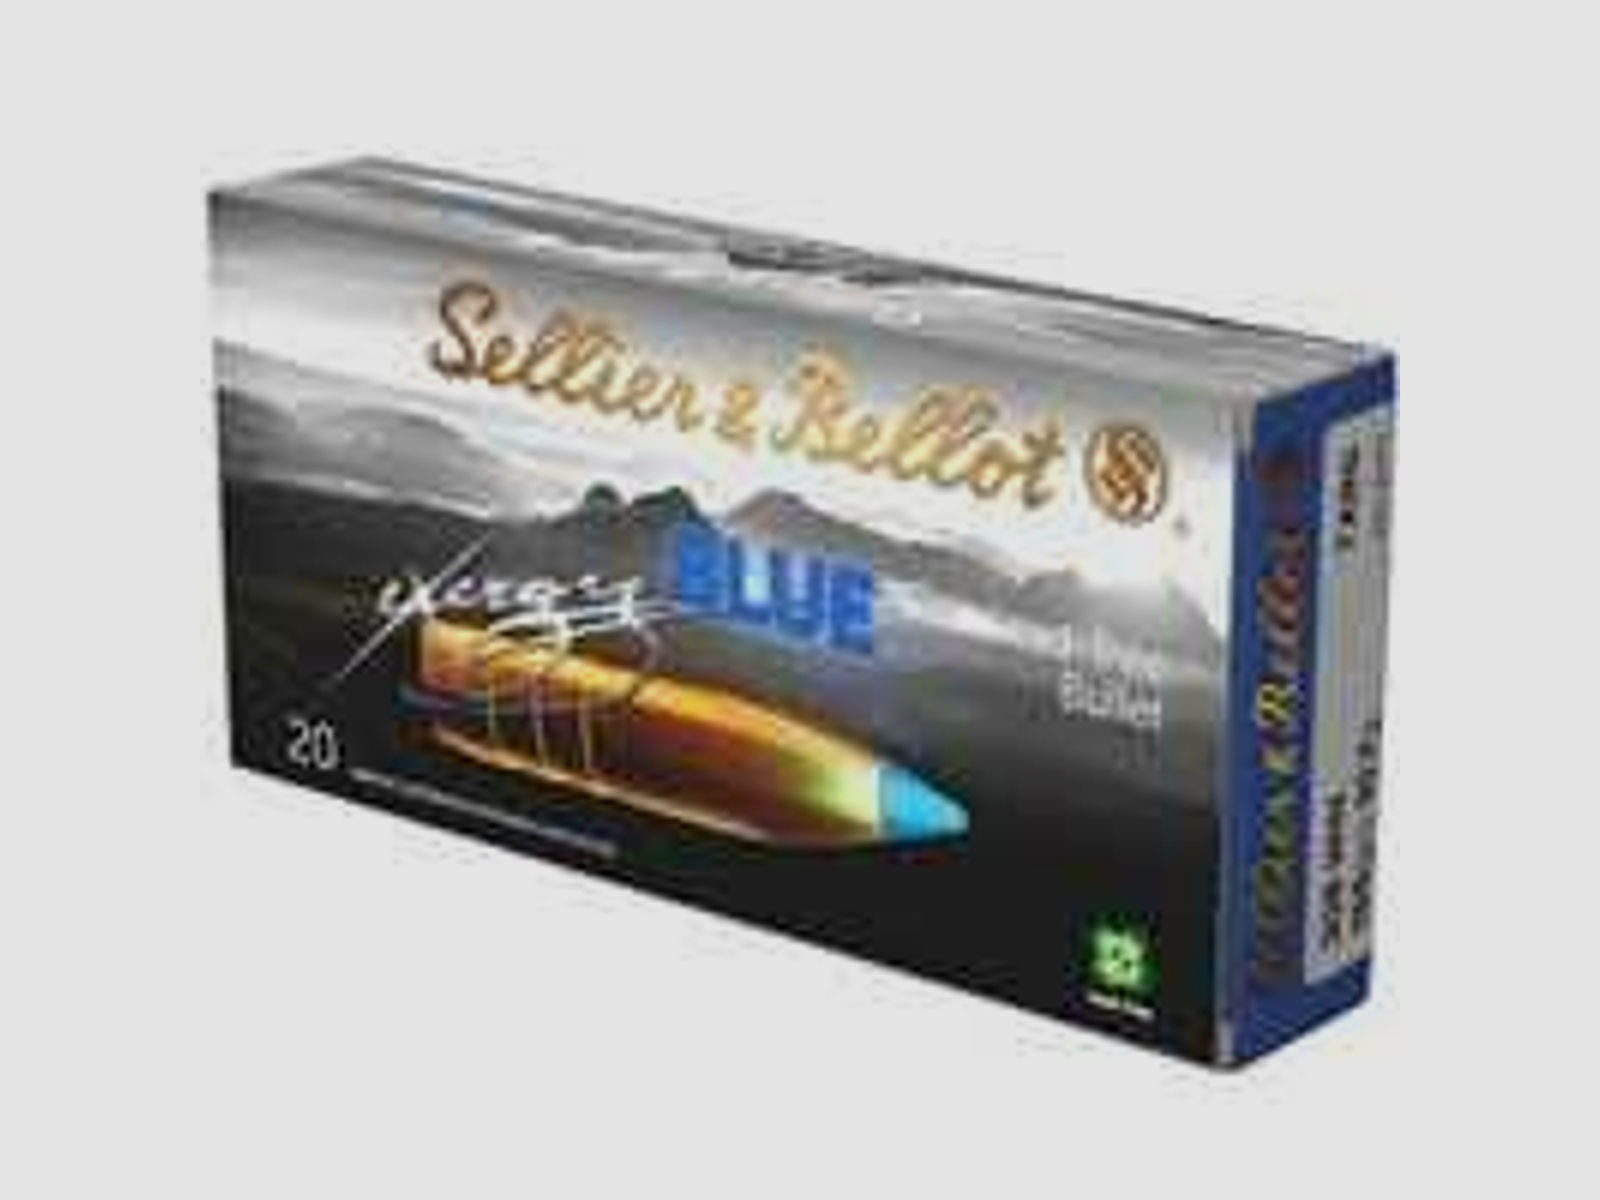 Sellier & Bellot	 .308 Win S&B tipped eXergy blue 165grs - 20Stk